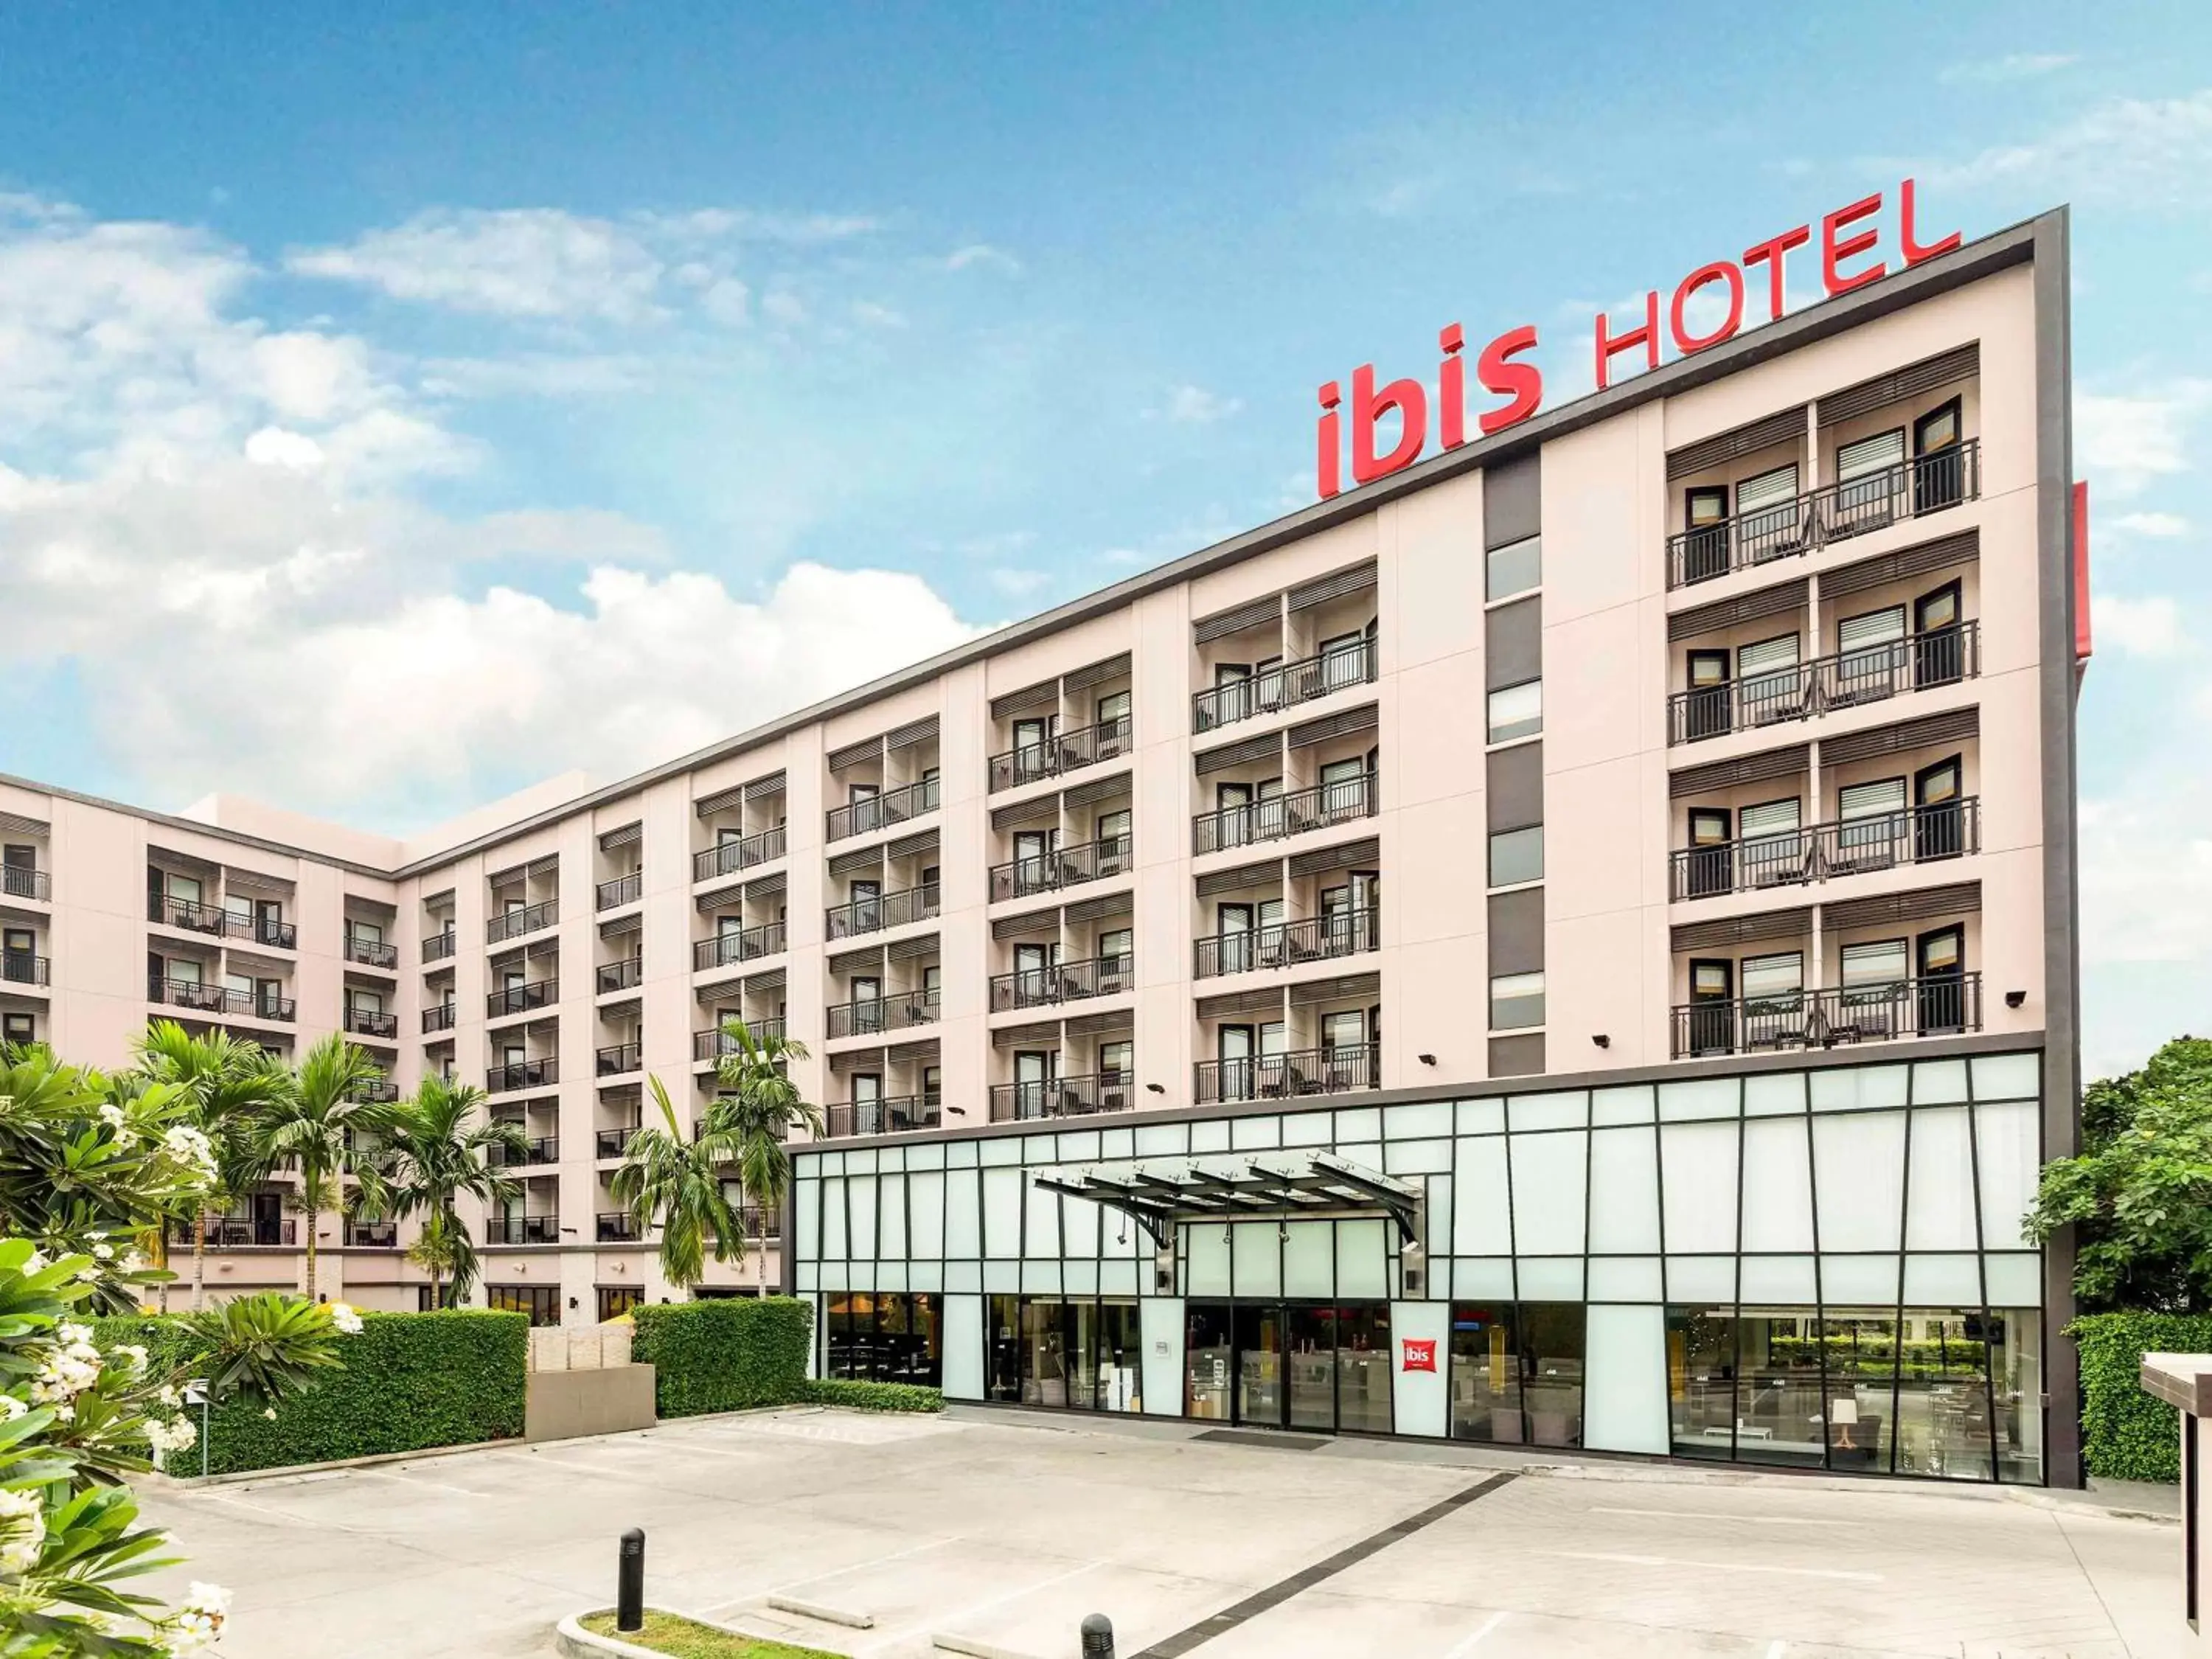 Other, Property Building in Ibis Hua Hin